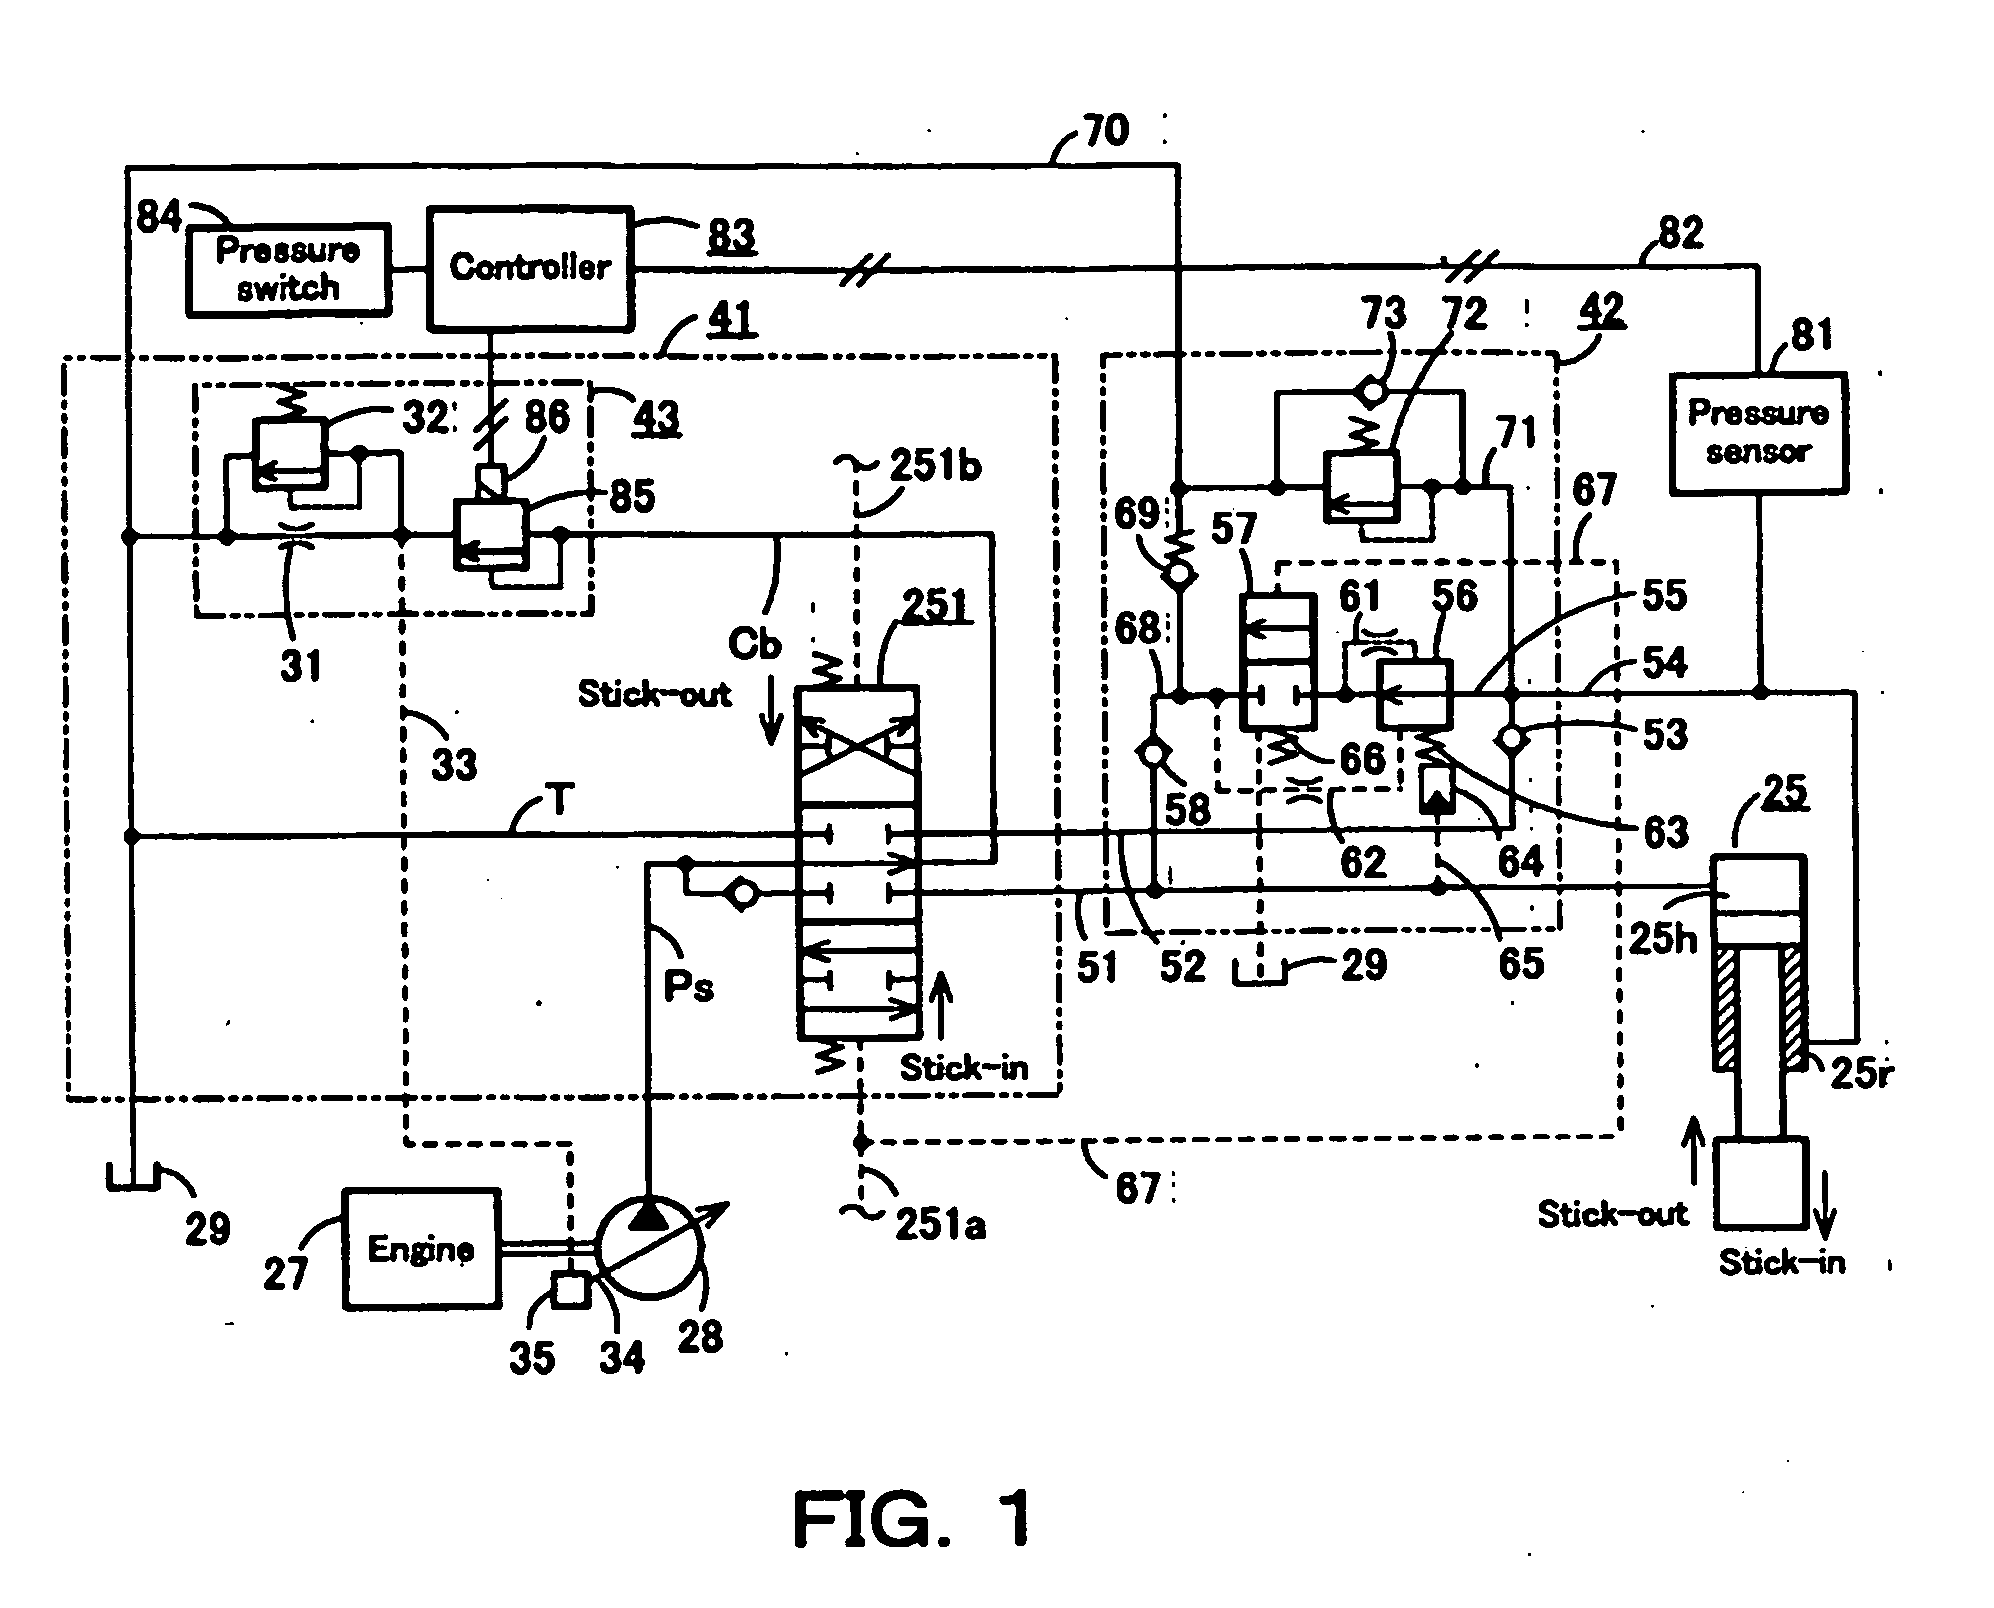 Control circuit for construction machine